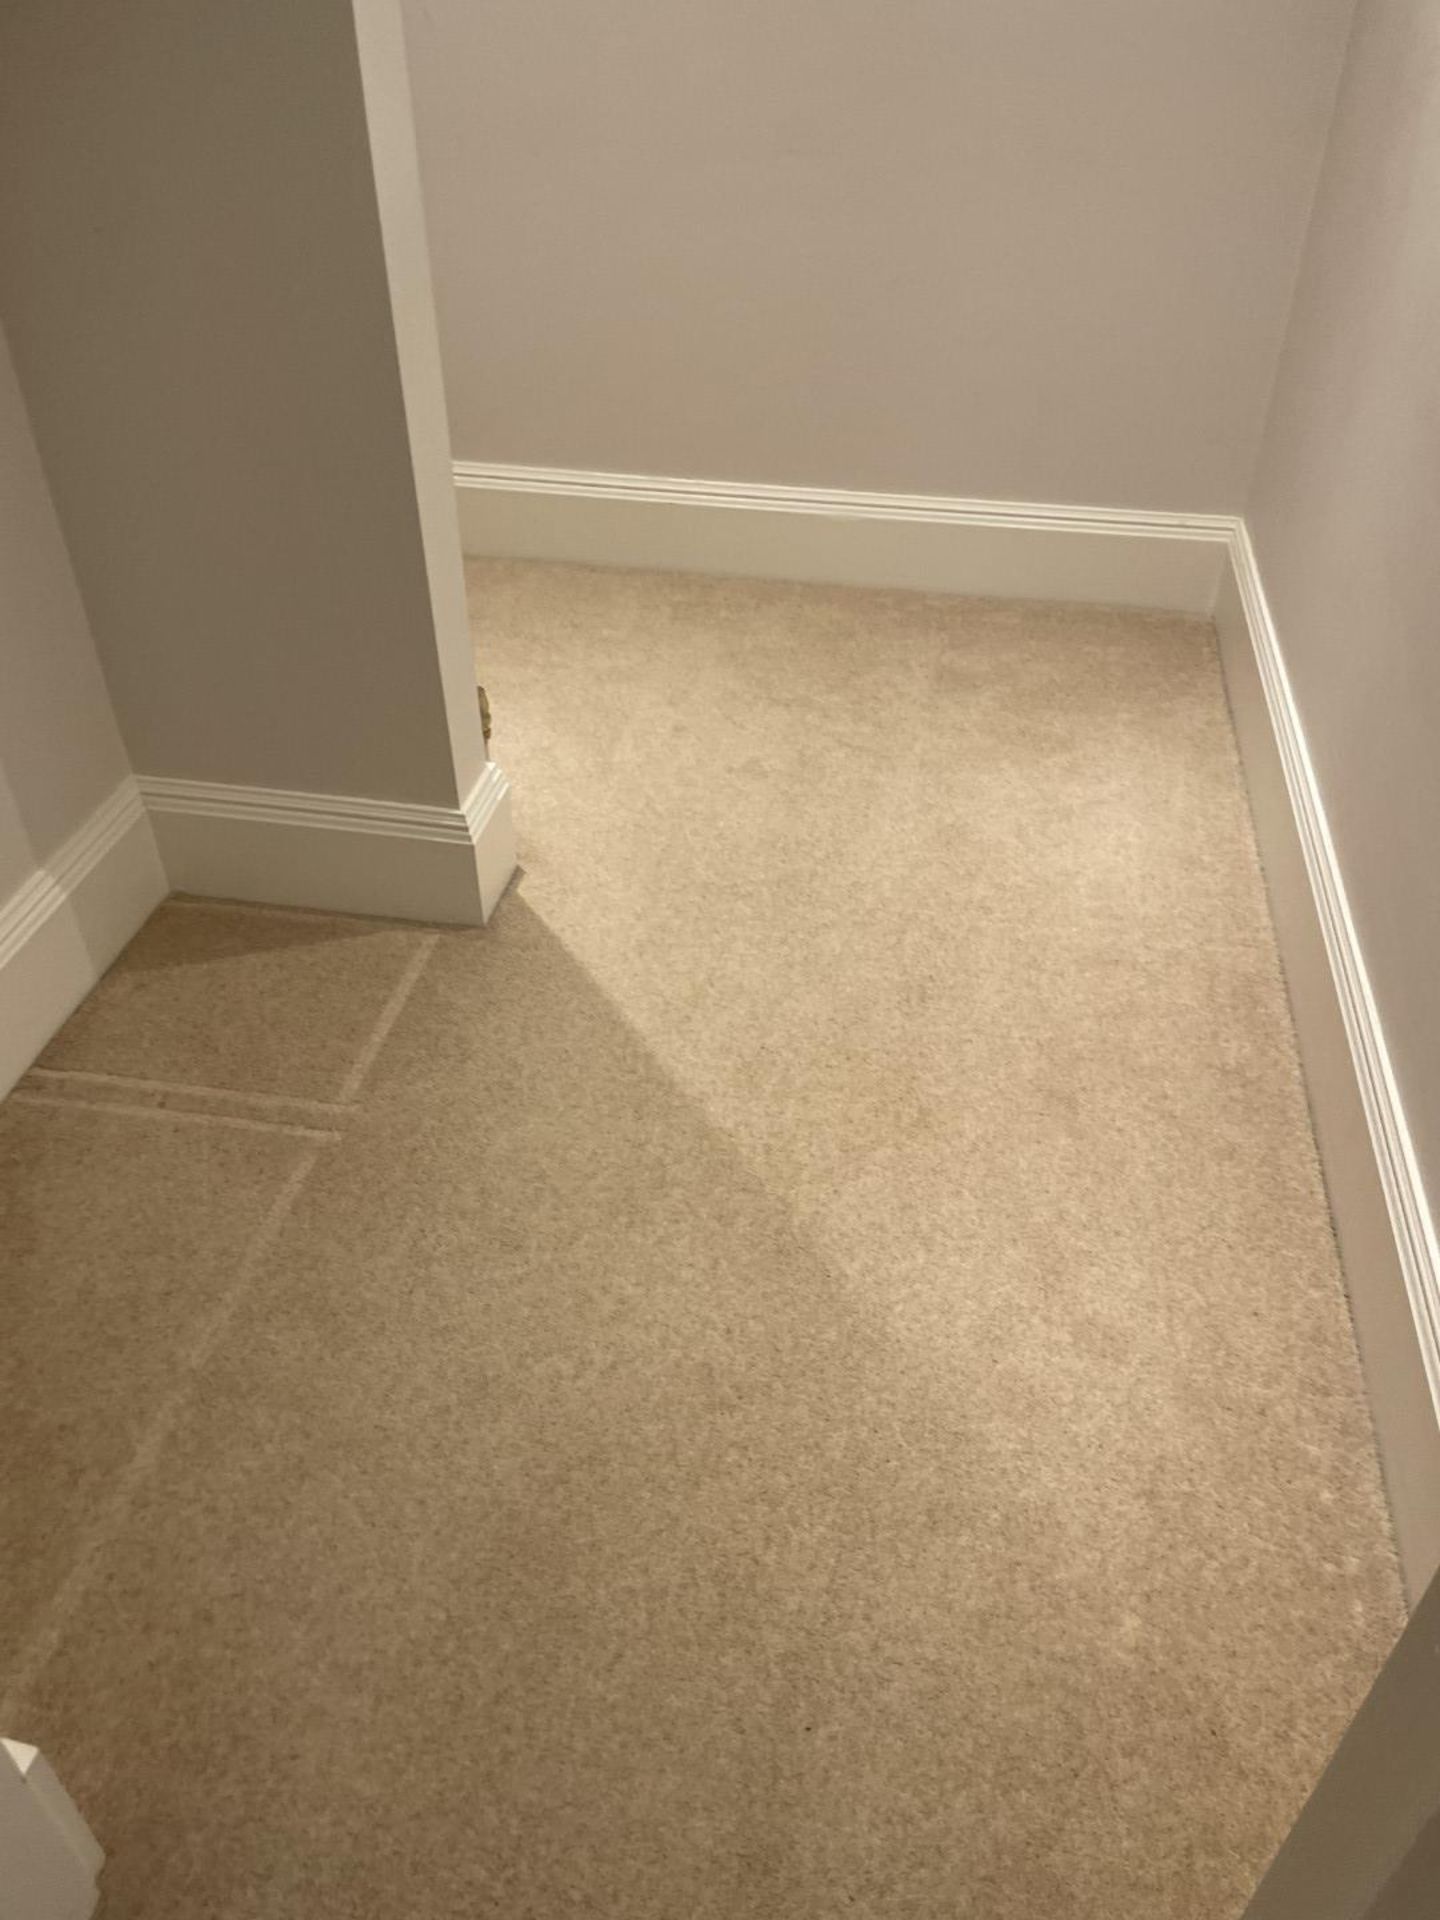 1 x Luxury Wool Back Bedroom Carpet in a Neutral Tone with Premium Underlay - Image 15 of 16